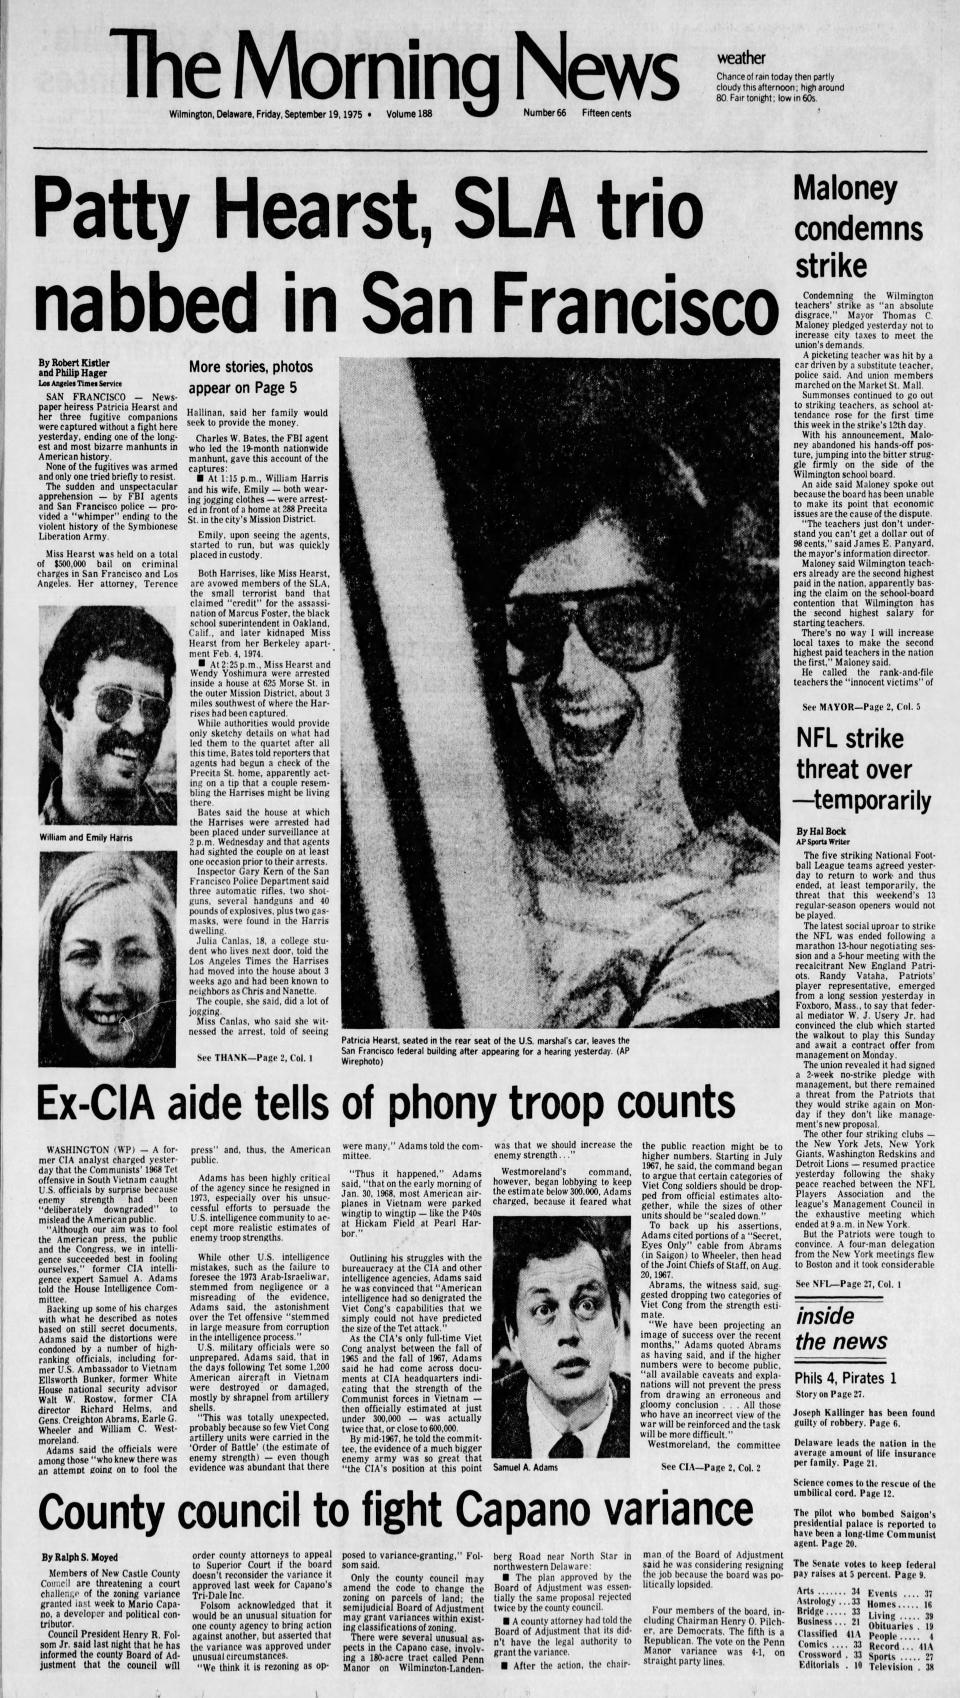 Front page of The Morning News from Sept. 19, 1975.